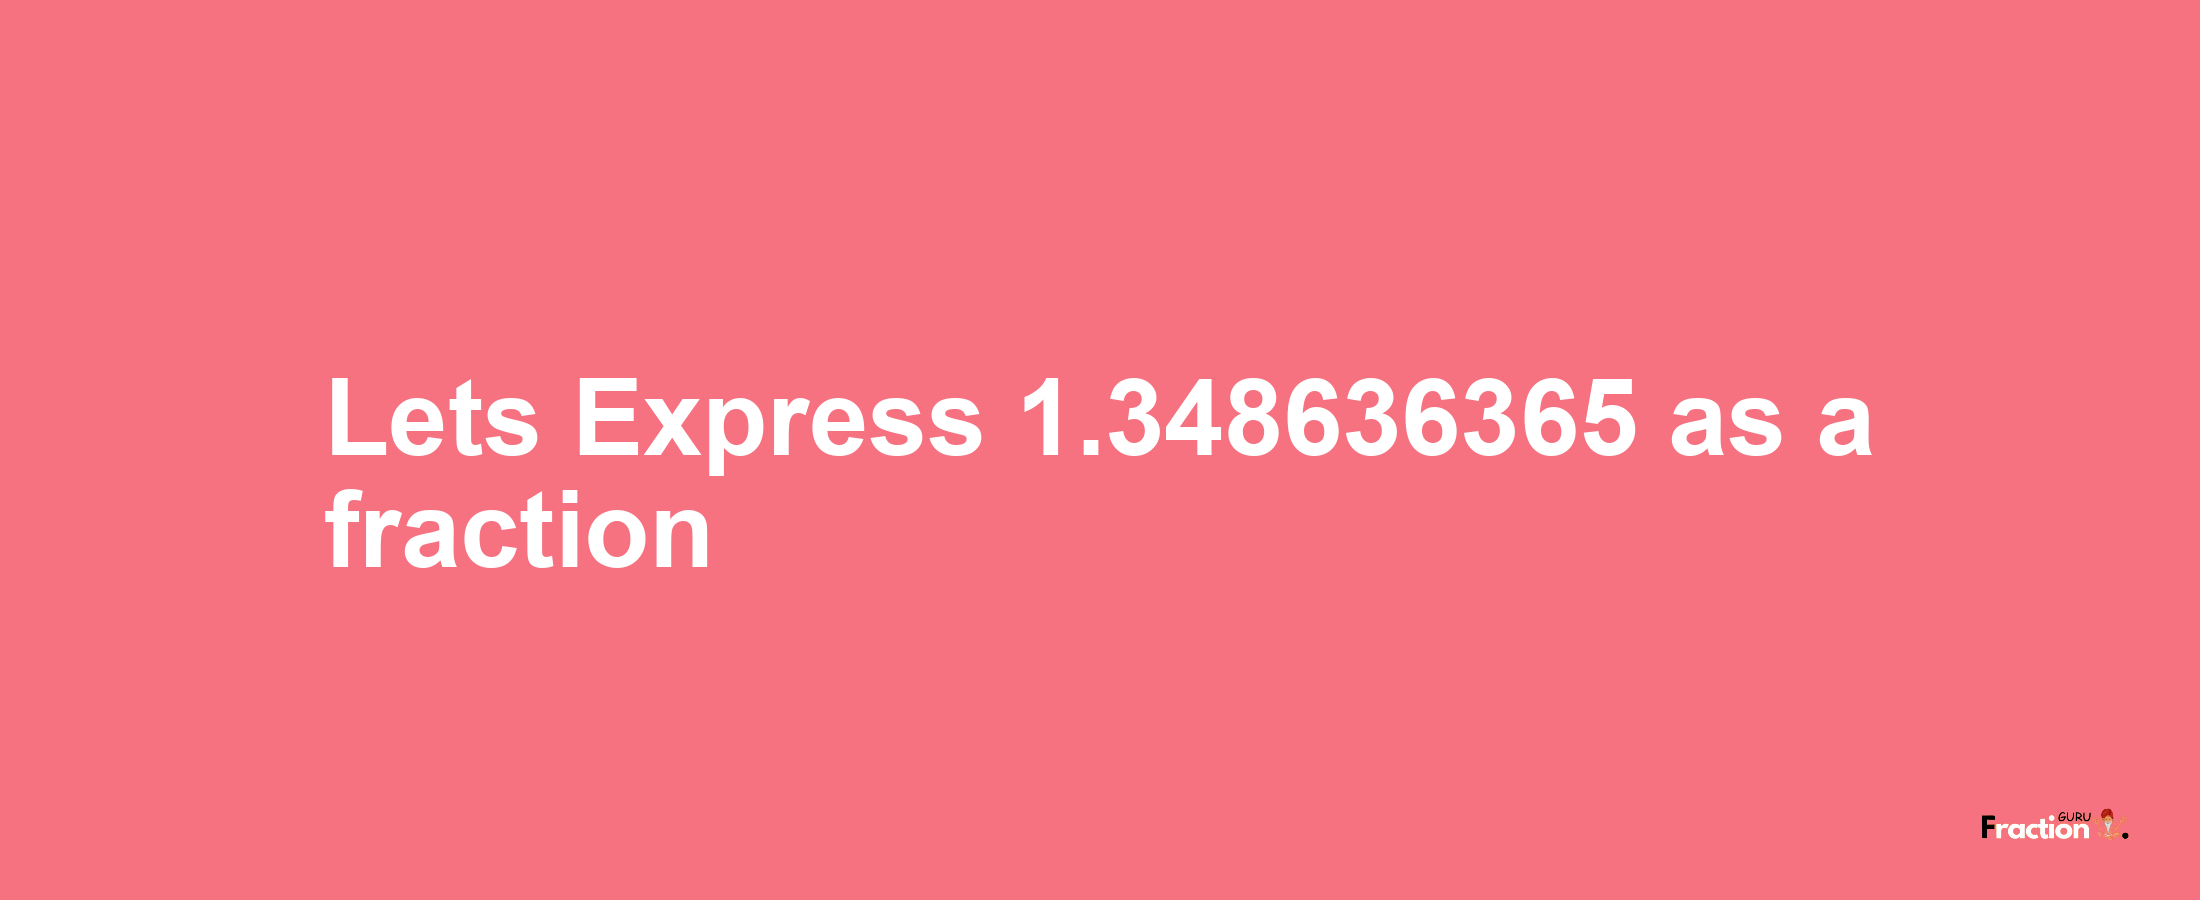 Lets Express 1.348636365 as afraction